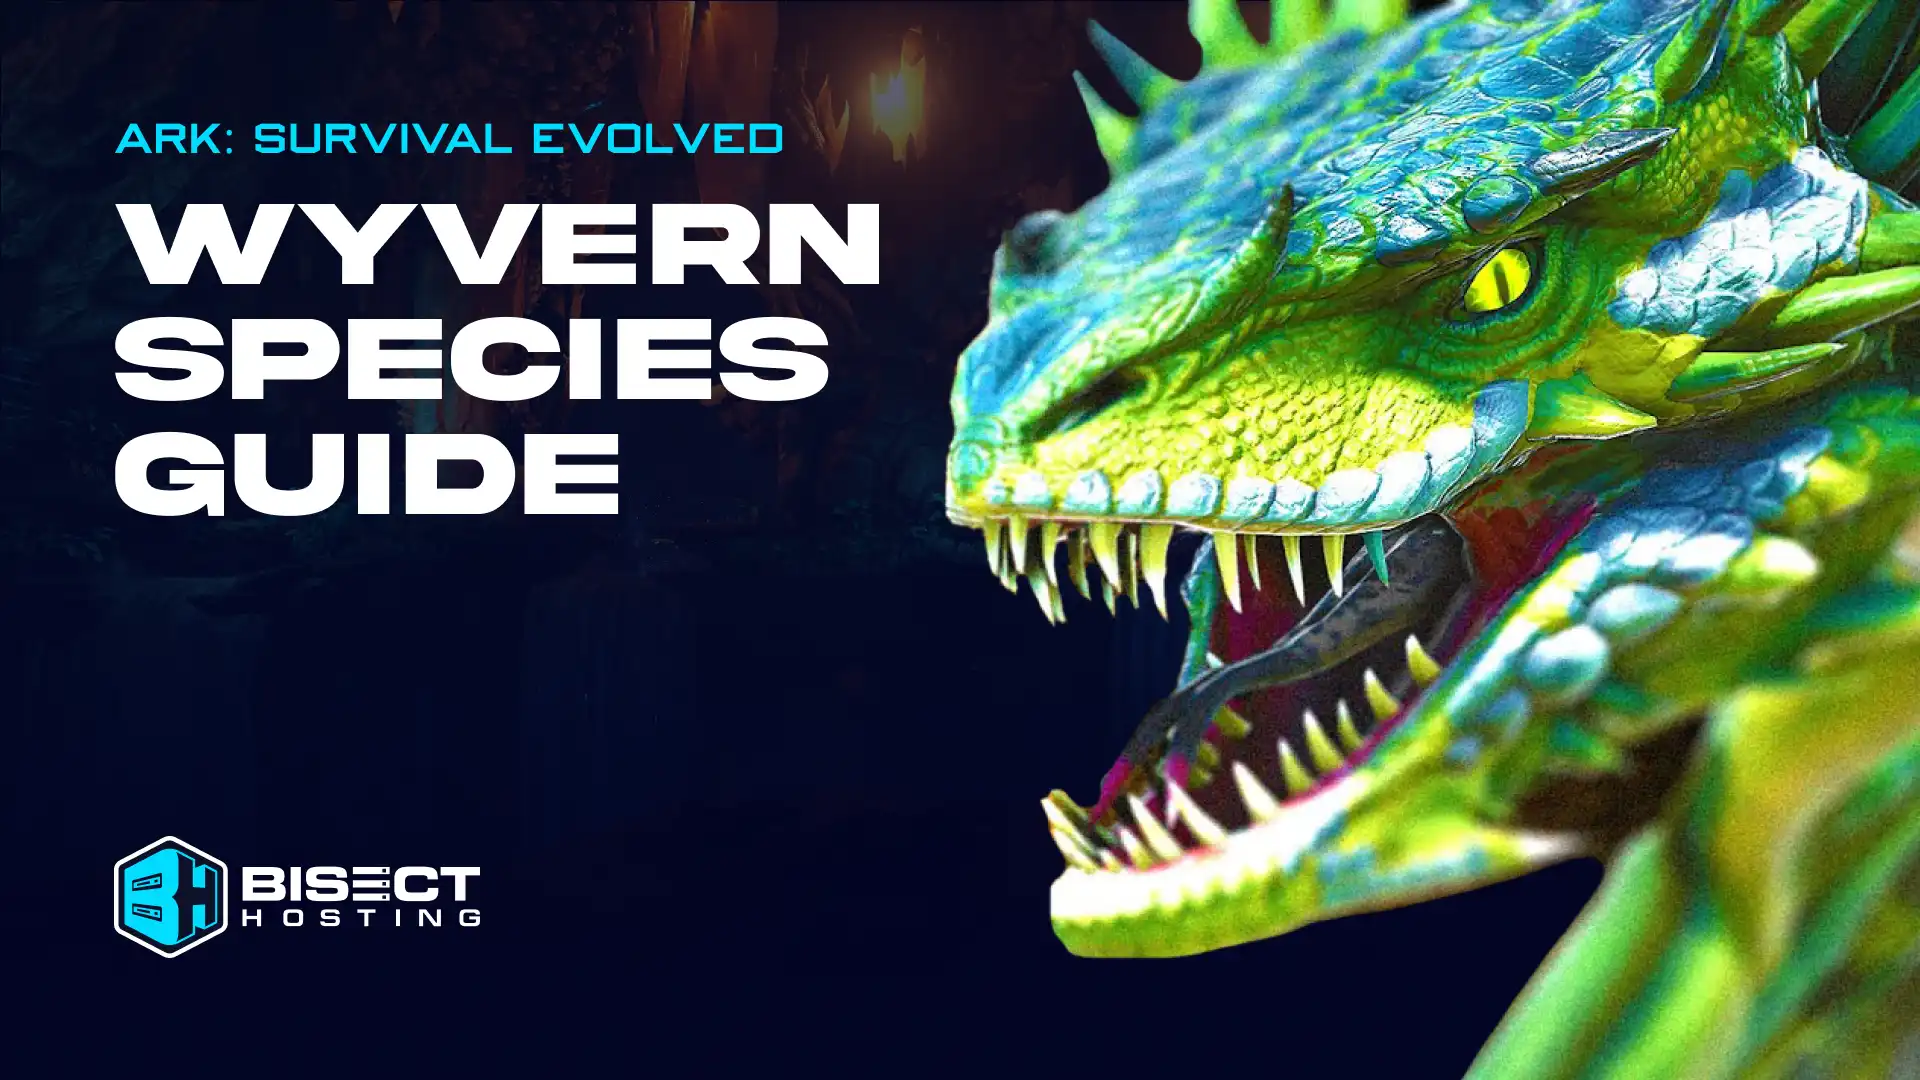 ARK: Survival Evolved Wyvern Species Guide - How to Tame, Locations, Stats, & more